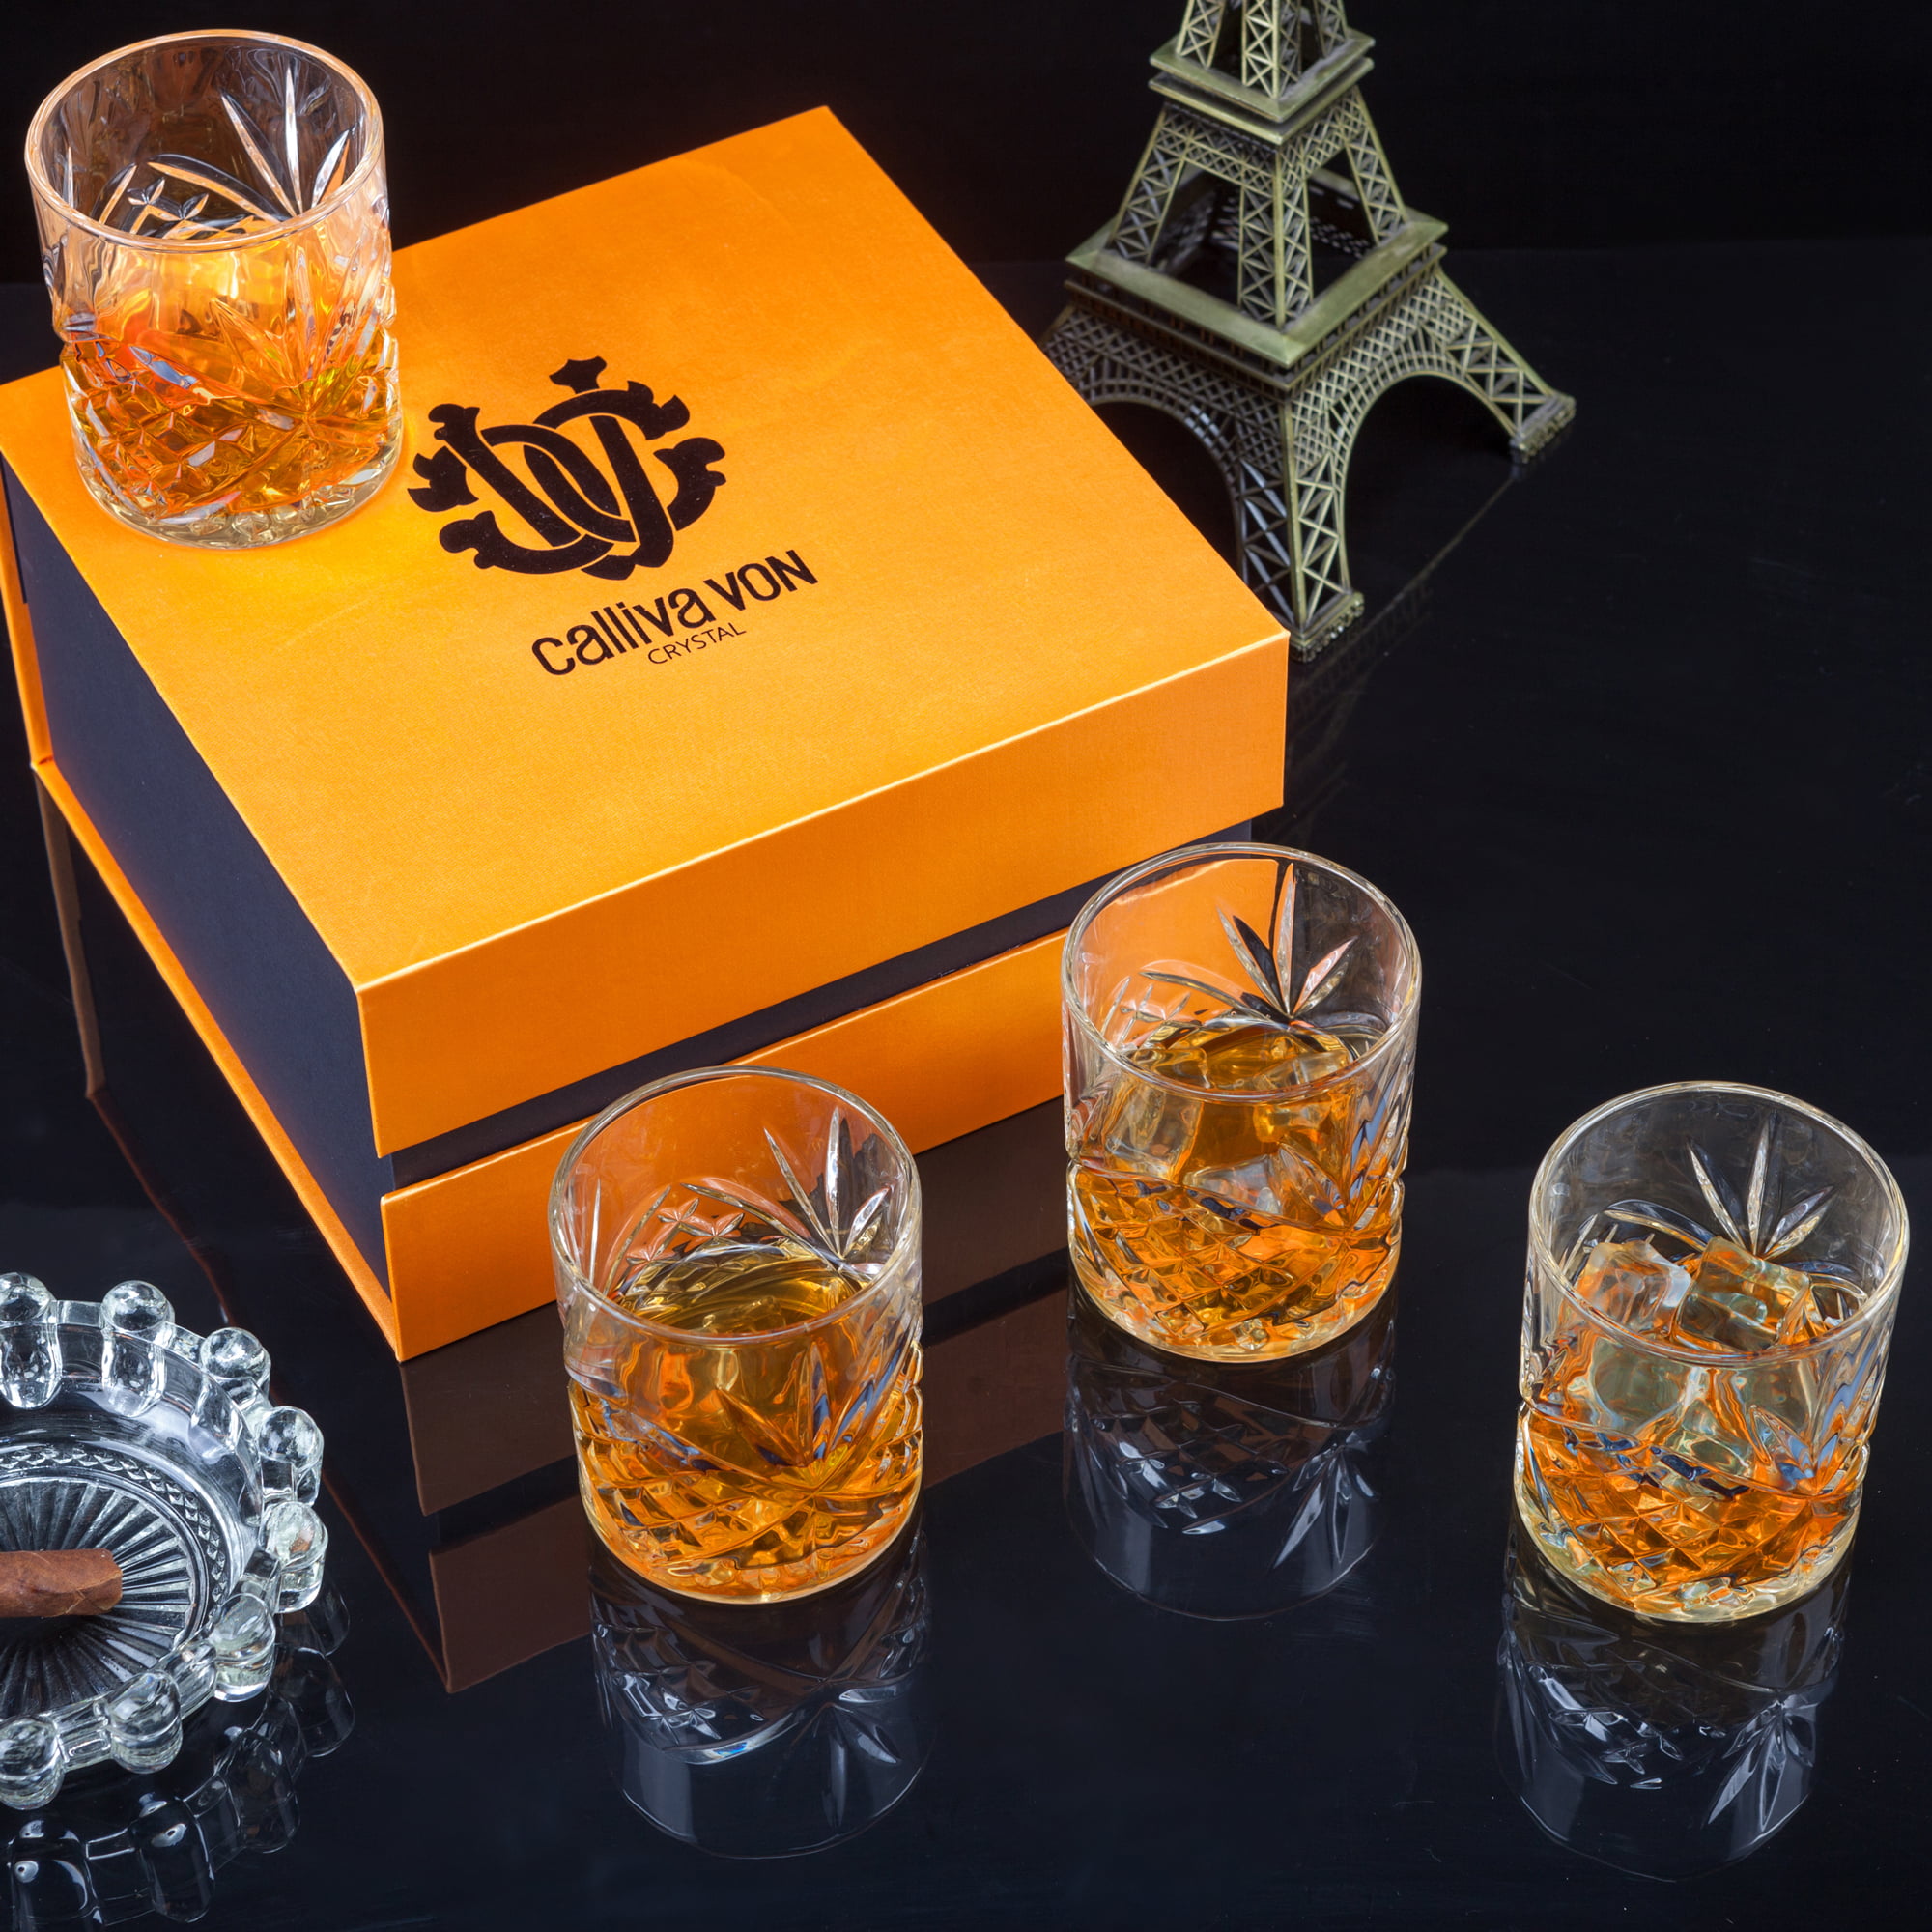 OPAYLY Whiskey Glasses Set of 410 oz Premium Old Fashioned Glass TumblerLiquor Crystal Rocks Glasses with Gift BoxClassic Rocks Glasses for Cognac